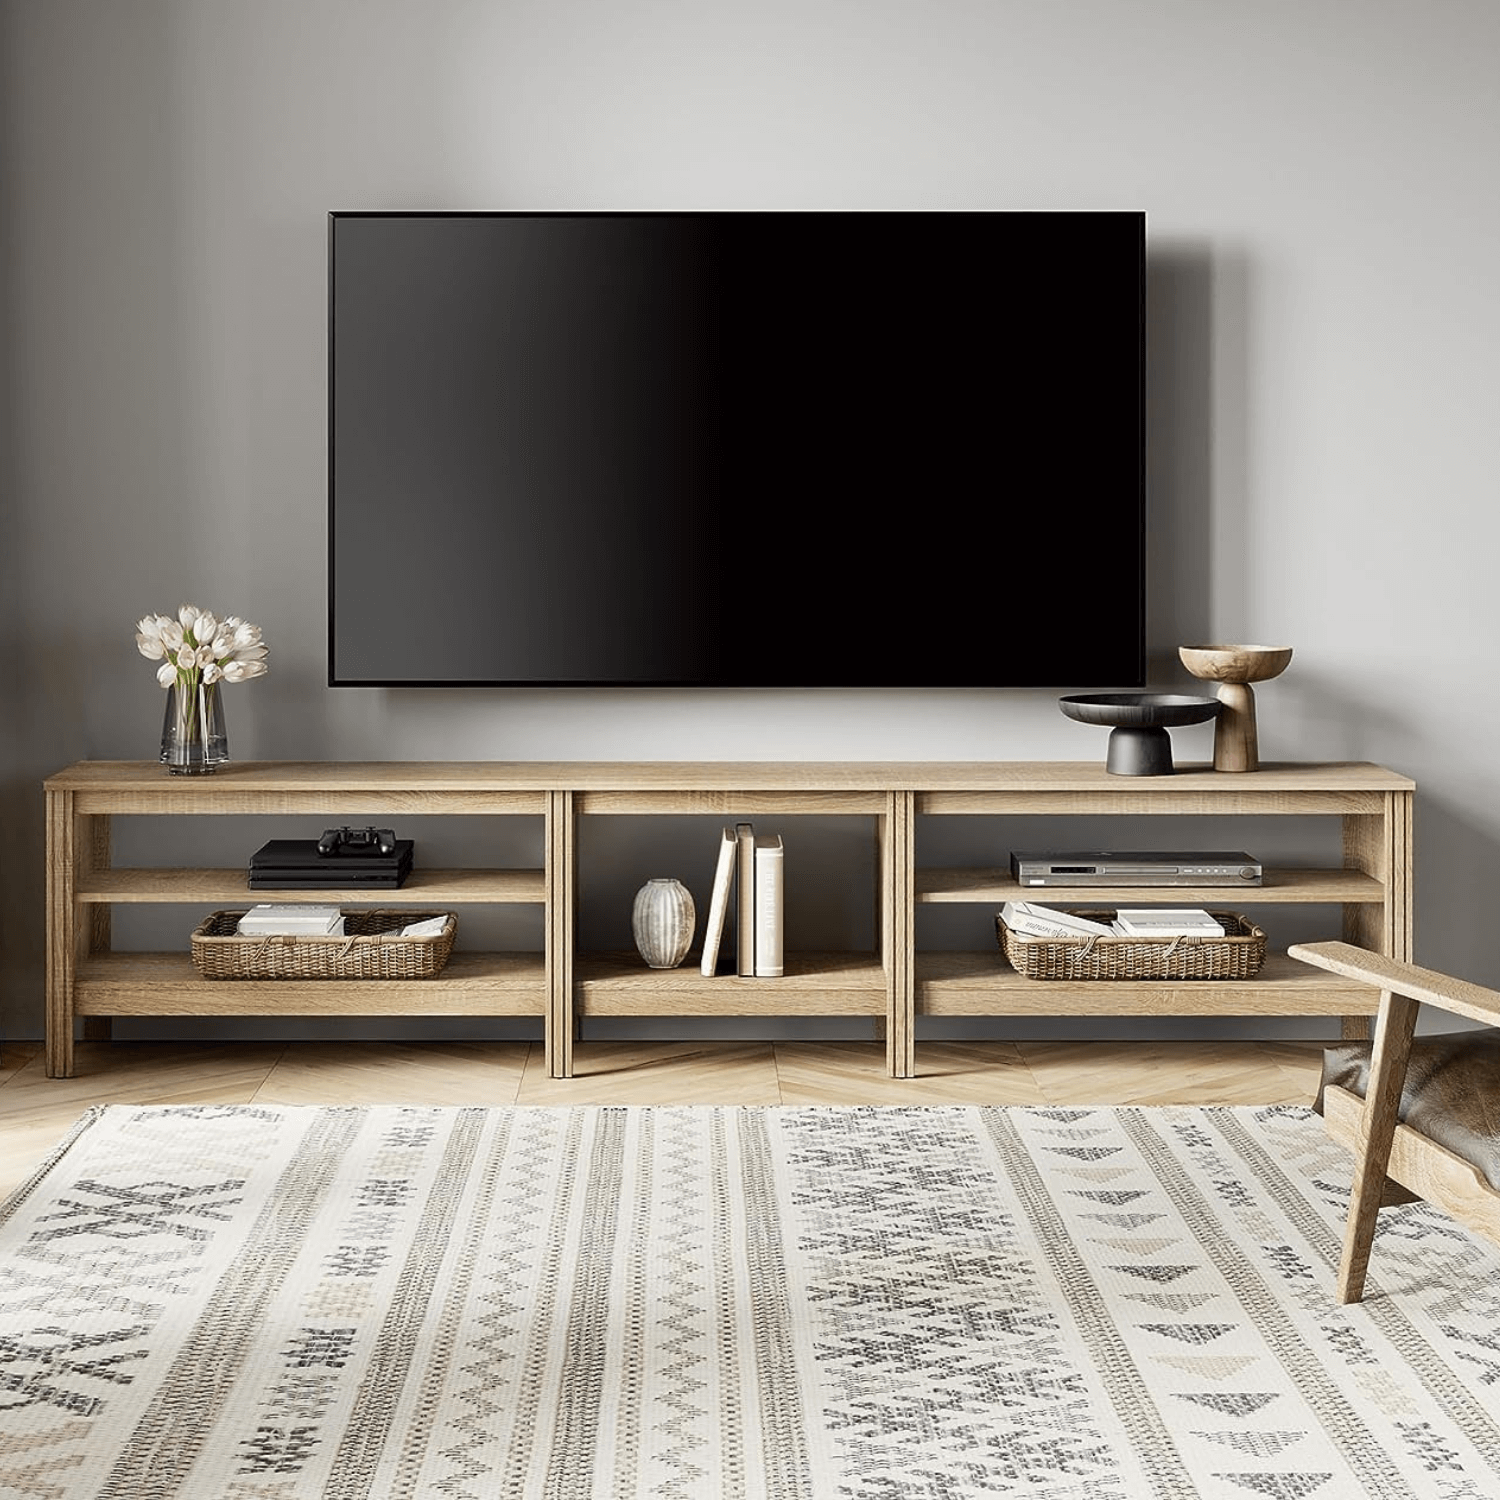 WAMPAT TV Stand for 85 Inch TV, Wood Entertainment Center for 80 90 100 inch TV Console Table for Living Room Bedroom, Oak